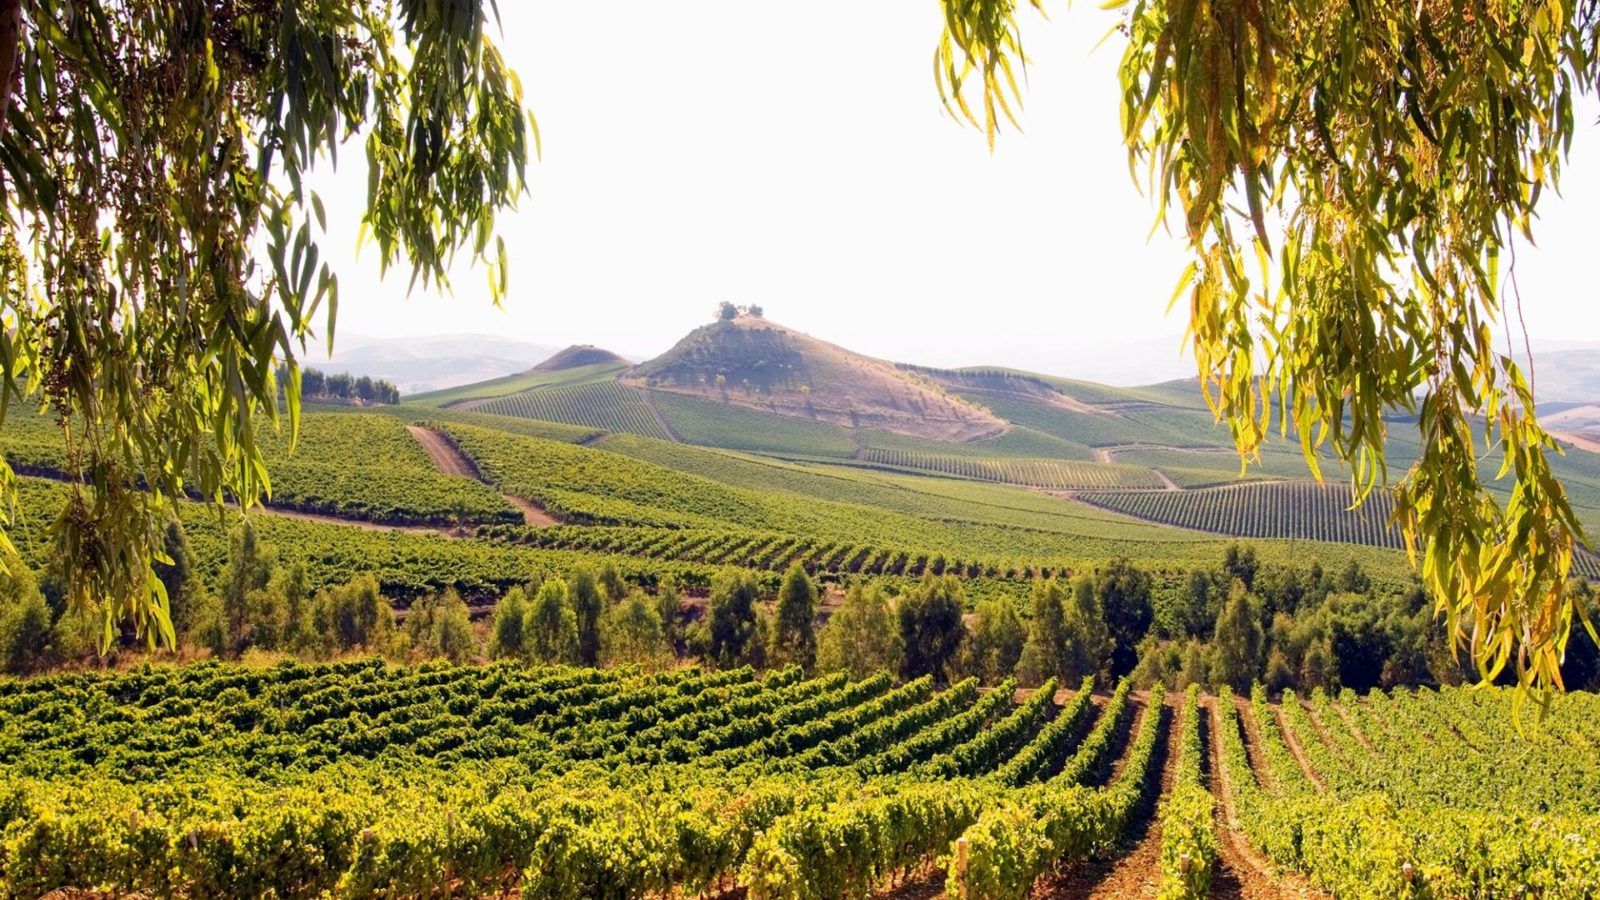 Italy’s lesser-known wine regions that need to be on your radar